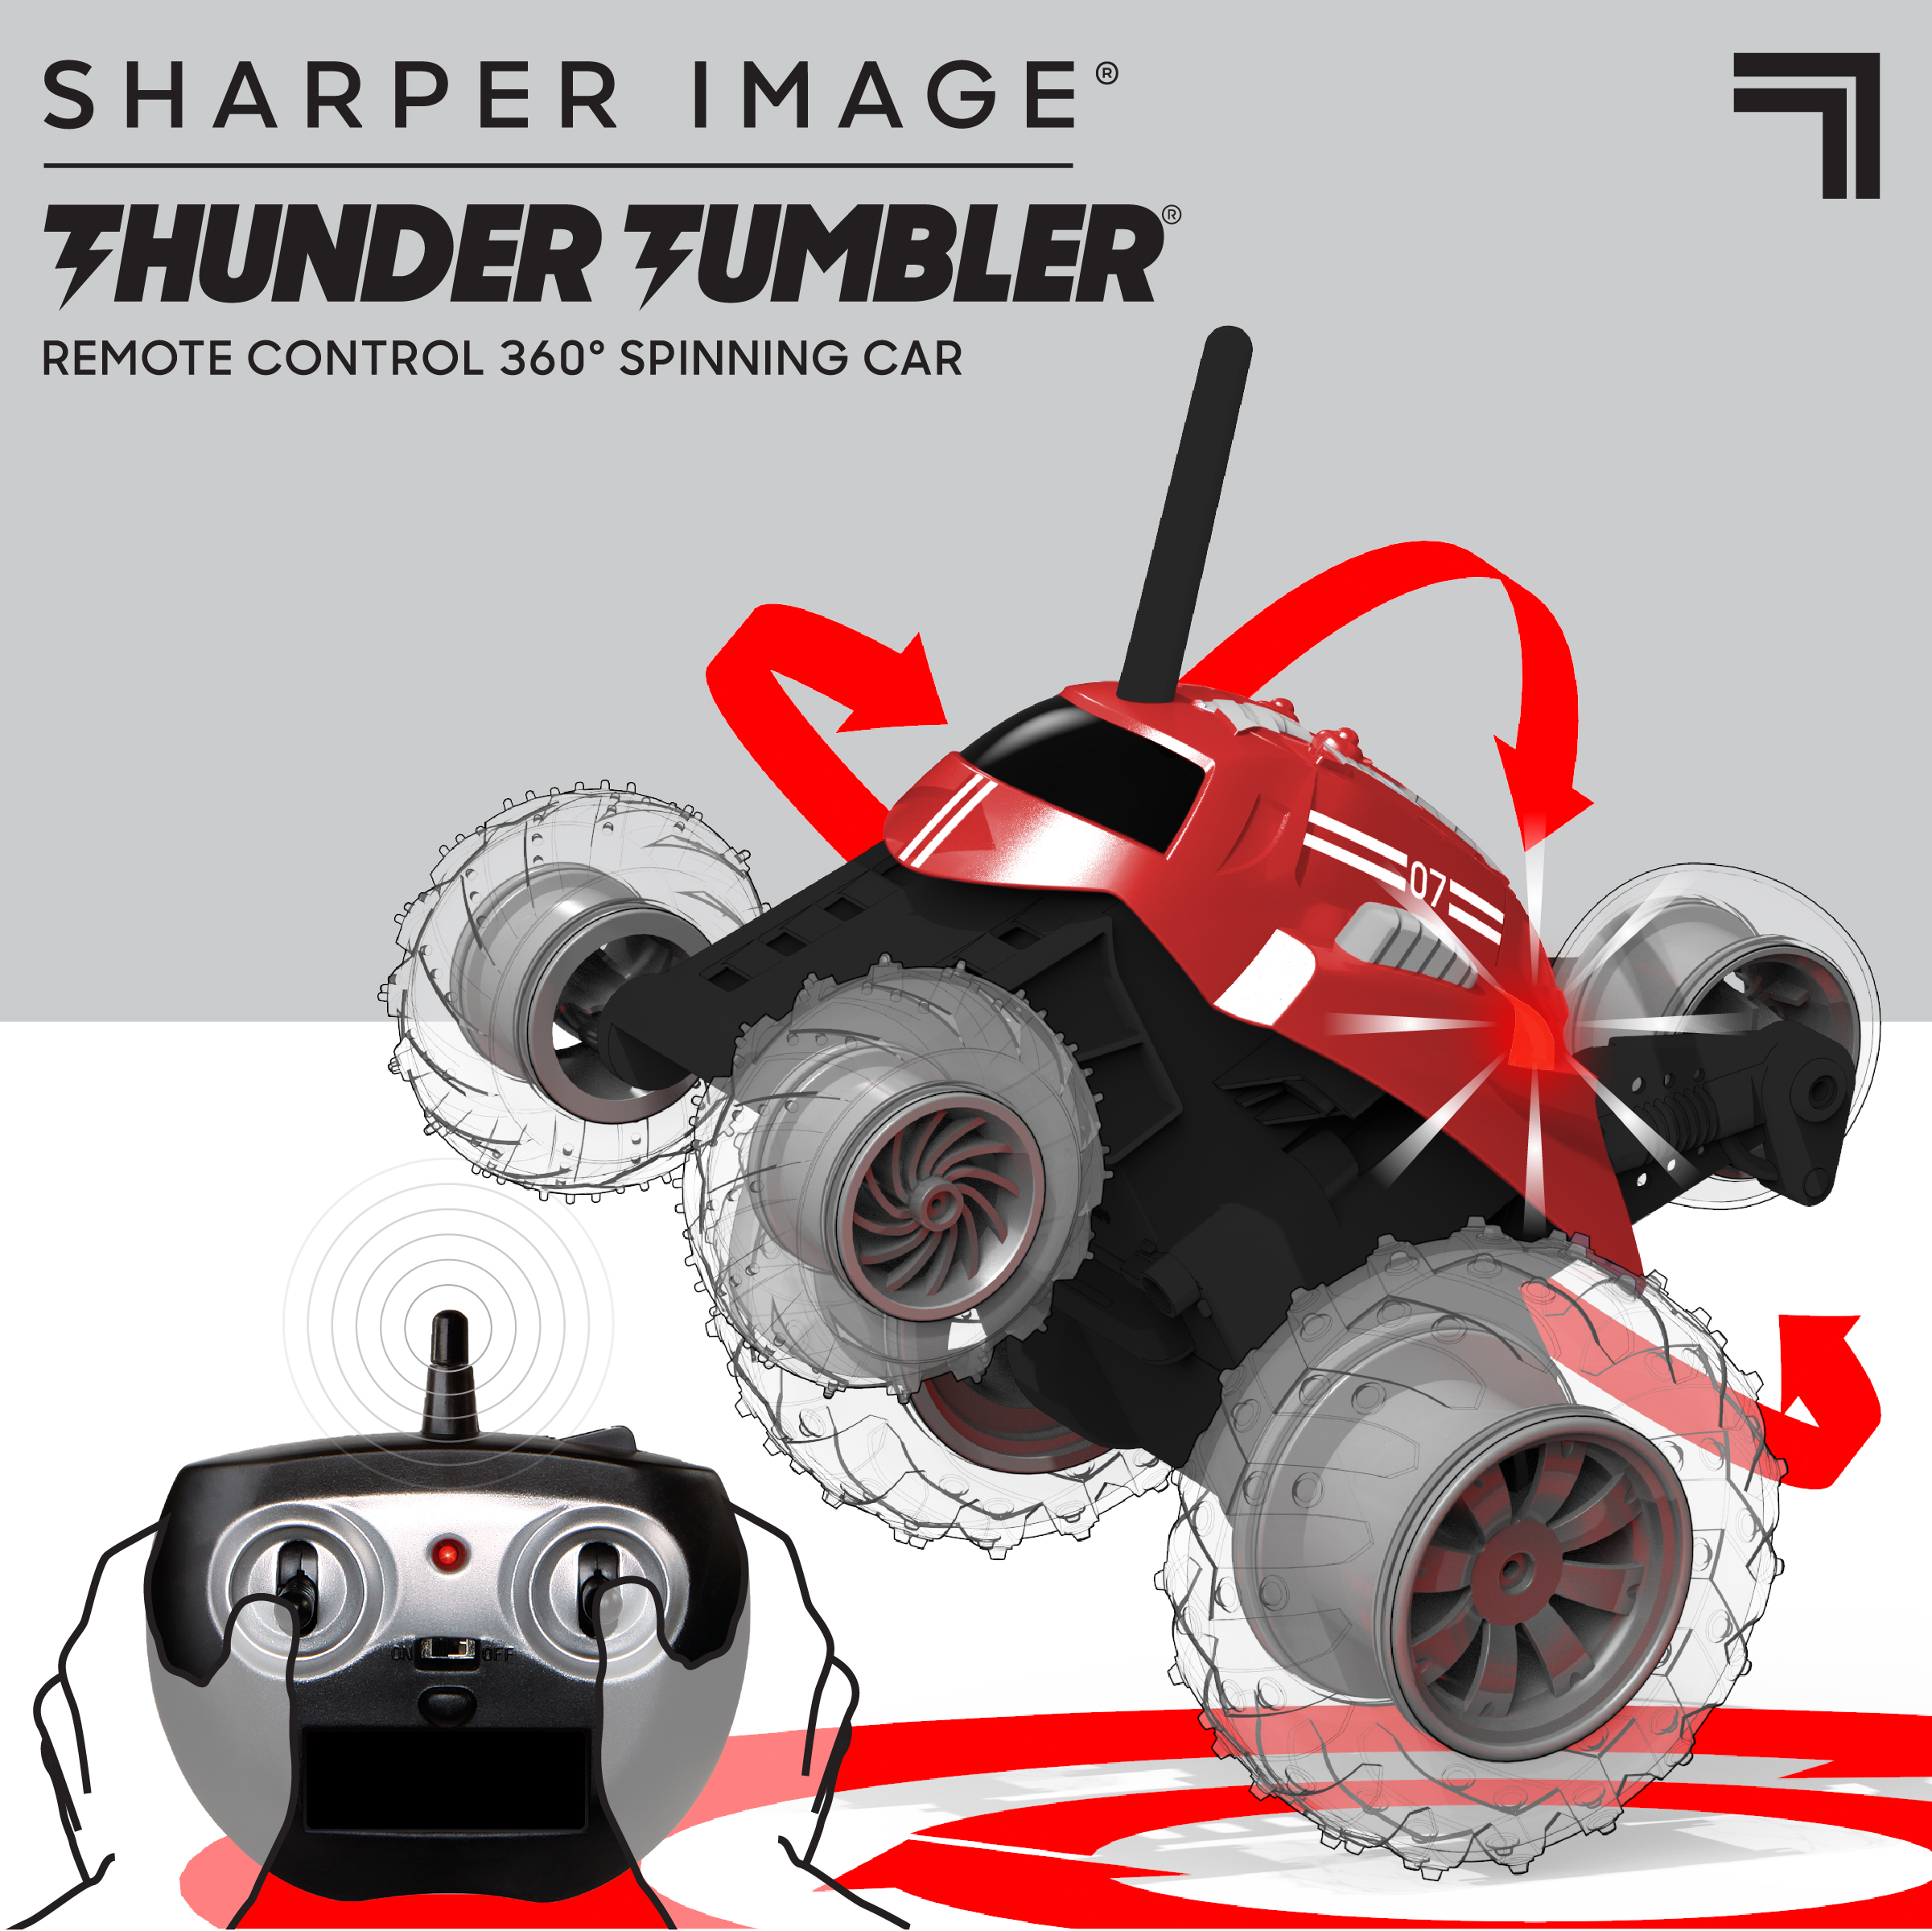 SHARPER IMAGE Thunder Tumbler Toy RC Car for Kids, Remote Control Monster Spinning Stunt Mini Truck for Girls and Boys, Racing Flips and Tricks with 5th Wheel, 49 MHz Black - image 3 of 14